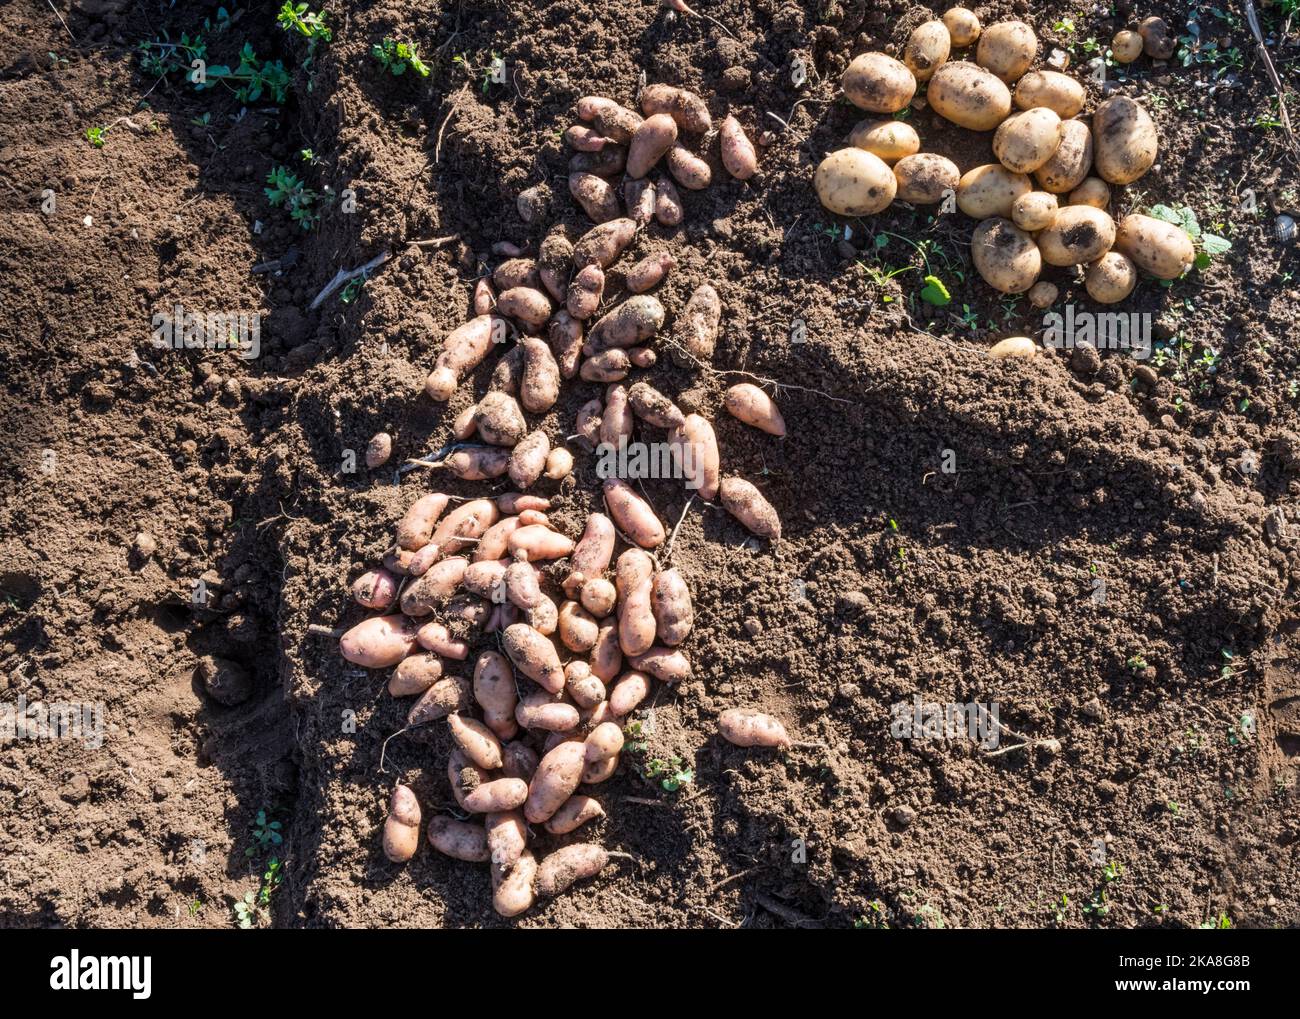 A pile of freshly dug up pink fir apple and Vivaldi potatoes, Solanum tuberosum.  Left in the sun to set or harden the skin - curing. Stock Photo